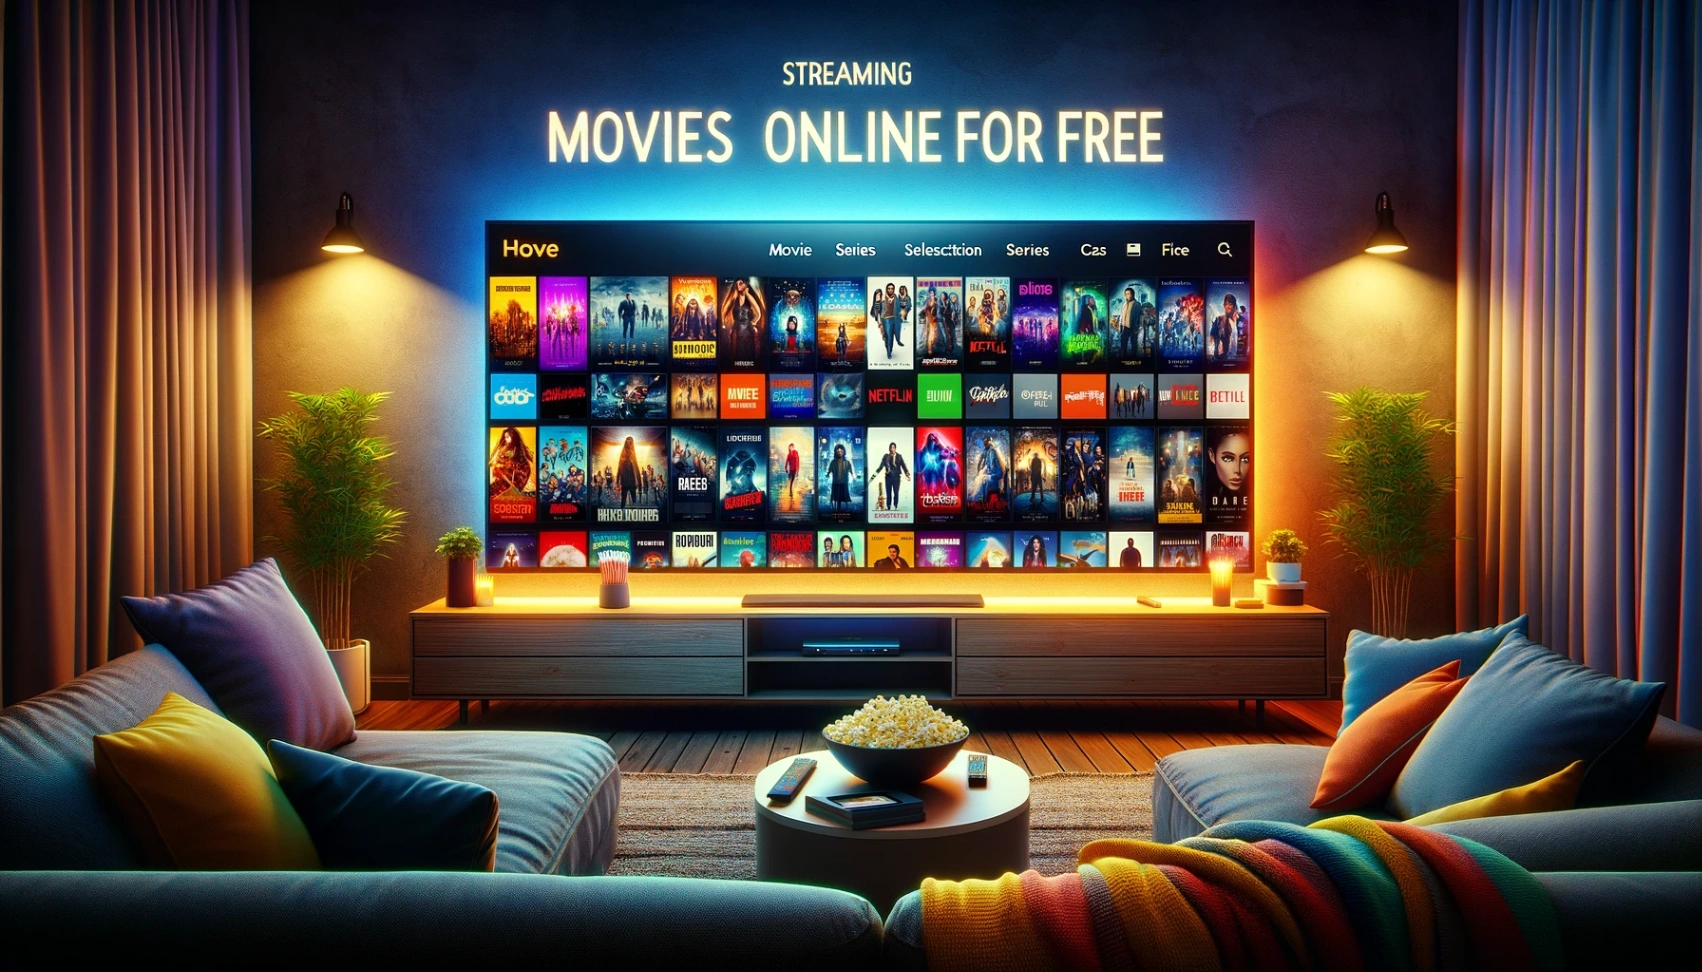 Learn How to Streaming Movies Online for Free